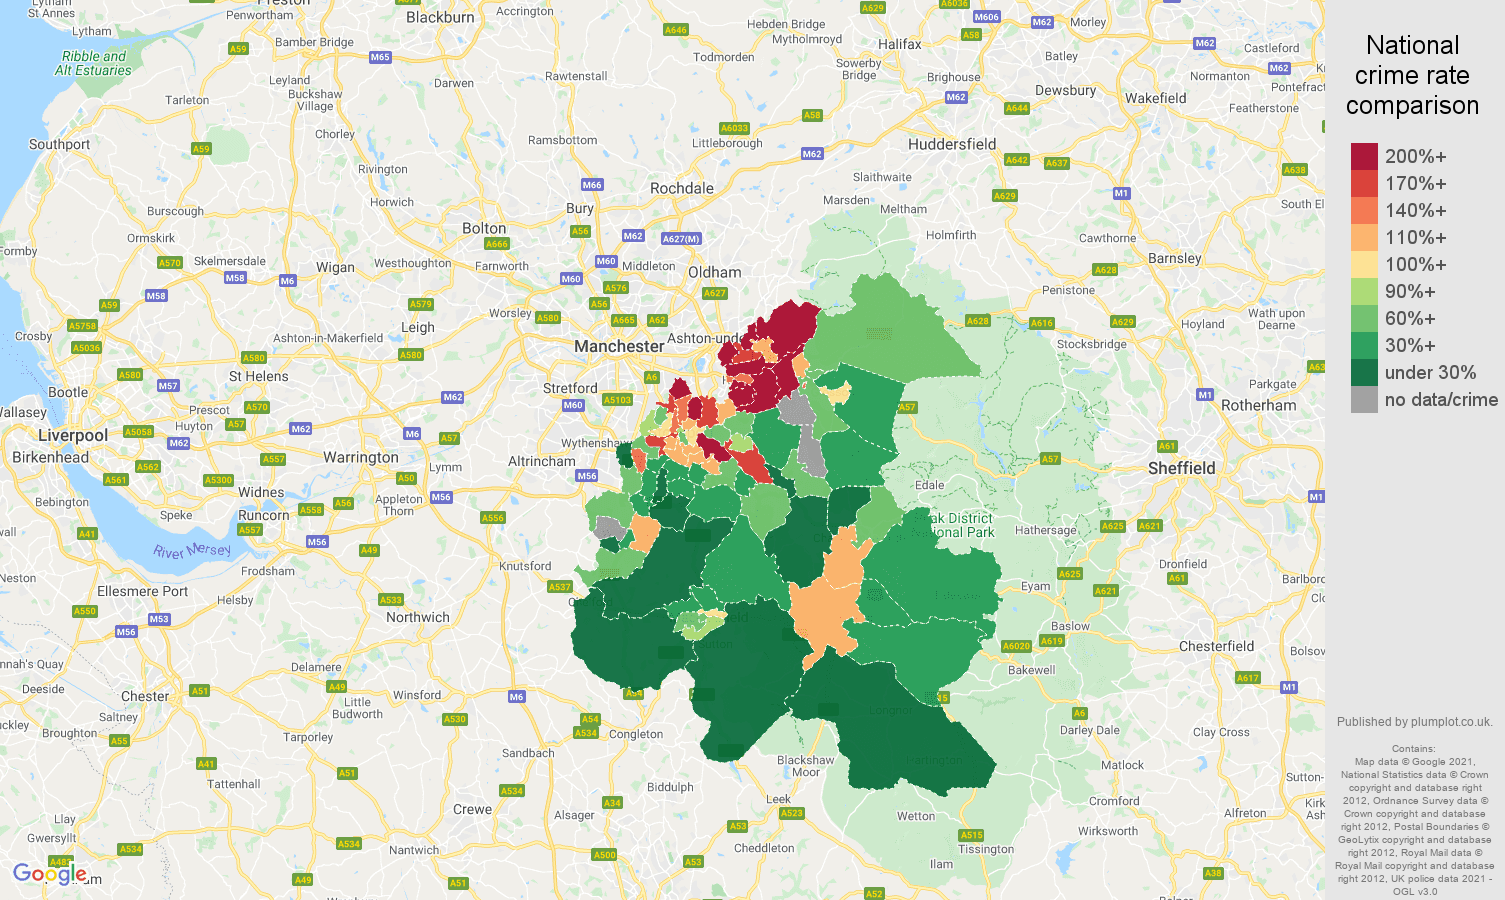 Stockport other crime rate comparison map